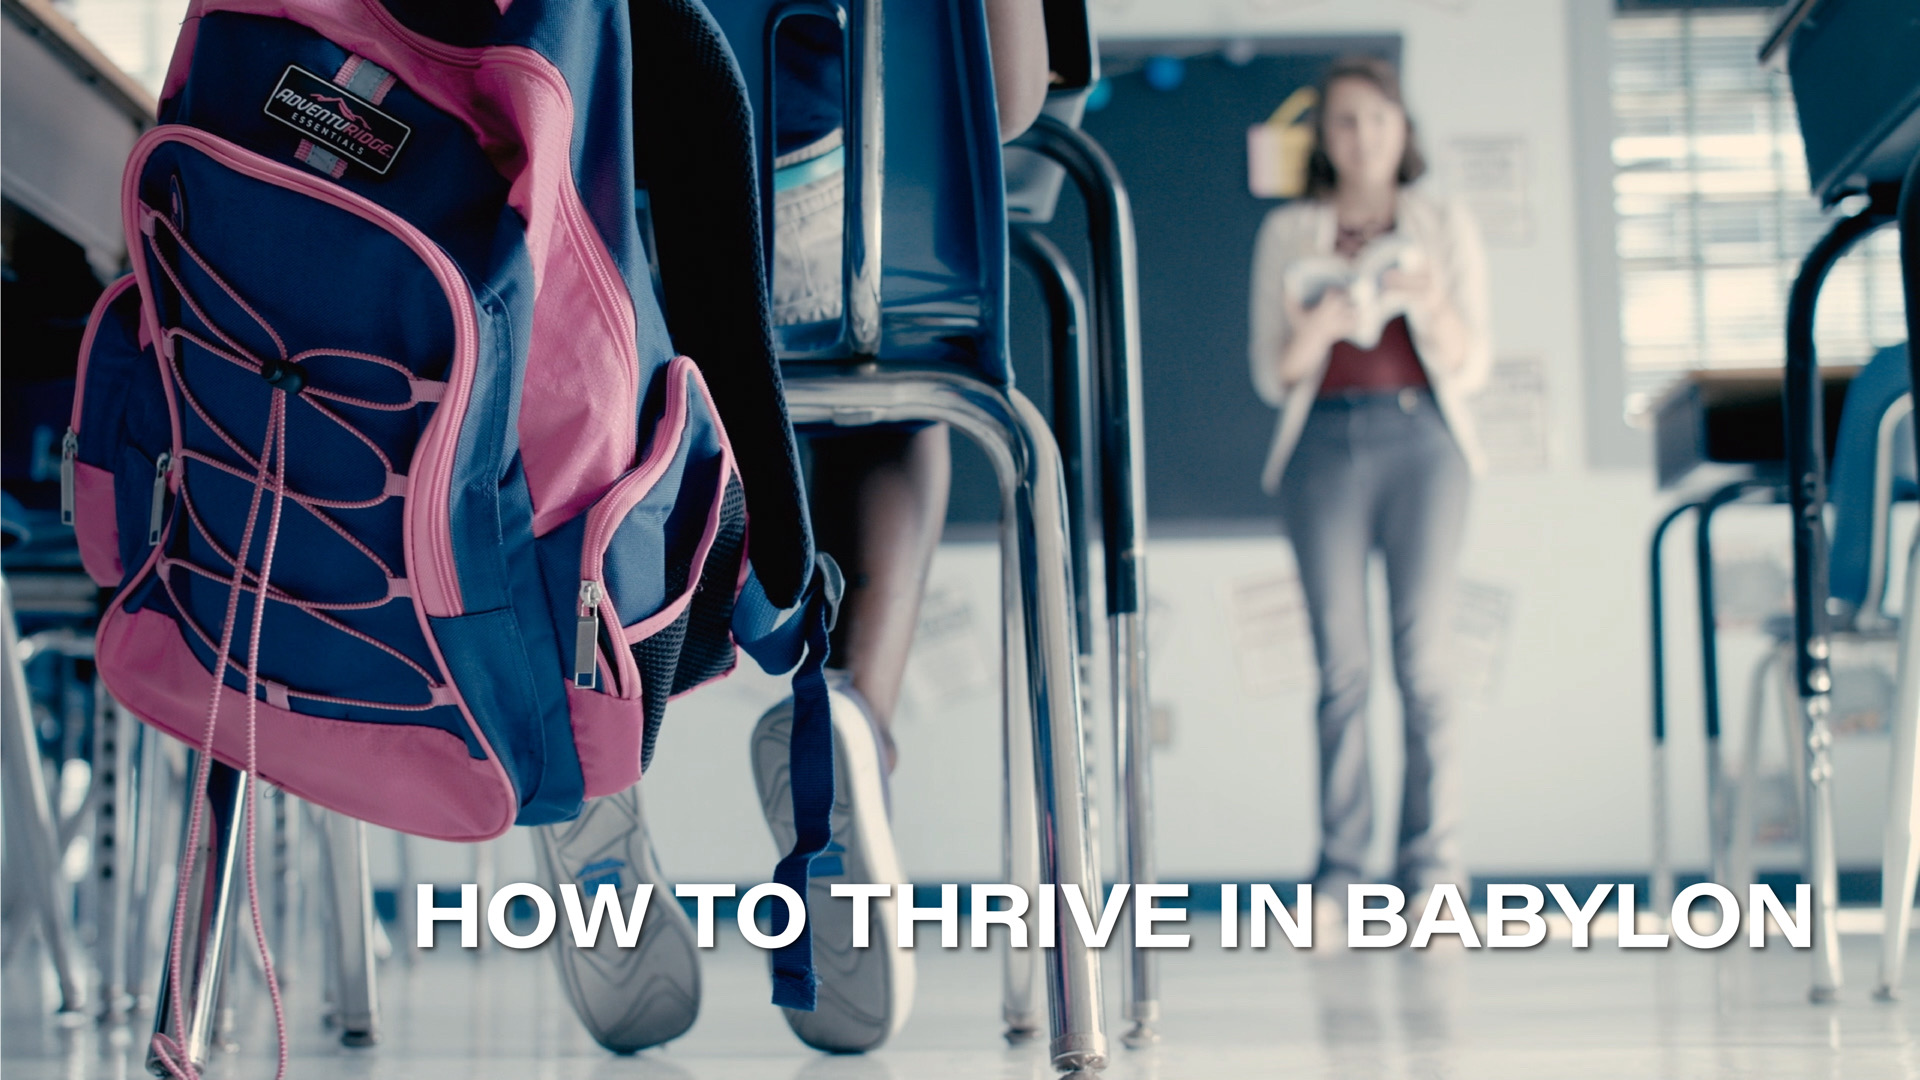 How To Thrive In Babylon